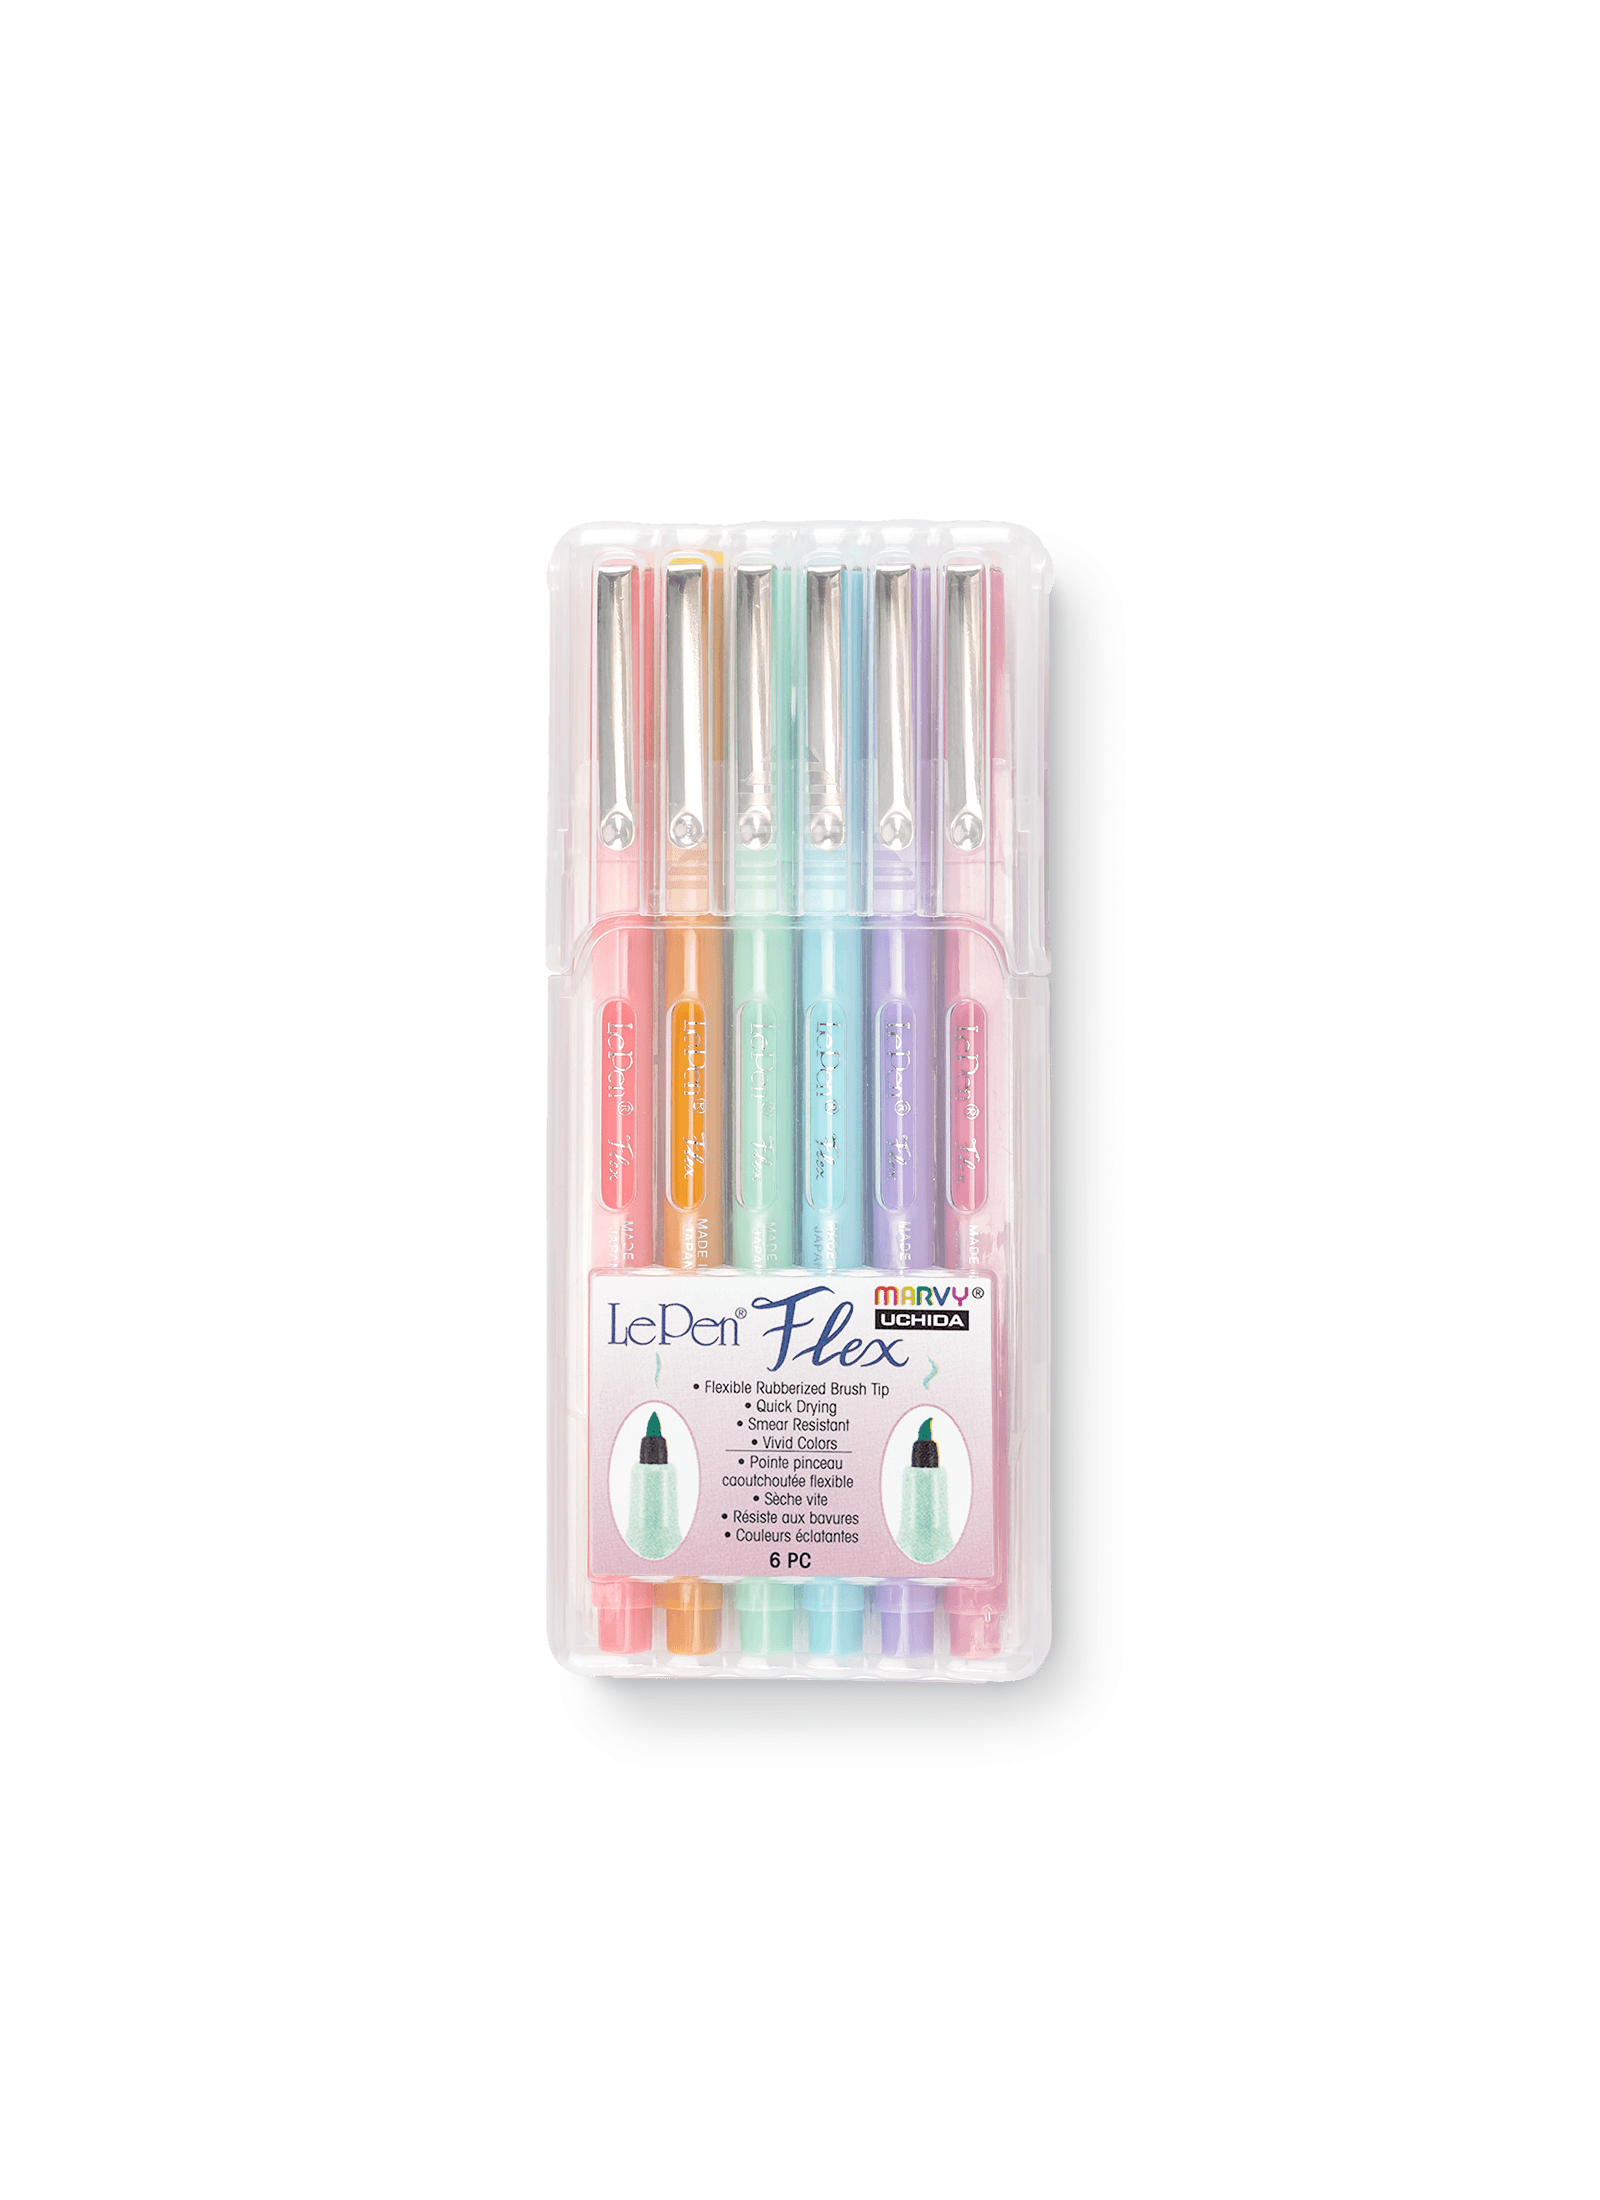 Le Pen Pastel Flex Set with a case, including Coral Pink, Ochre, Peppermint, Pale Blue, Wisteria, Dusty Pink